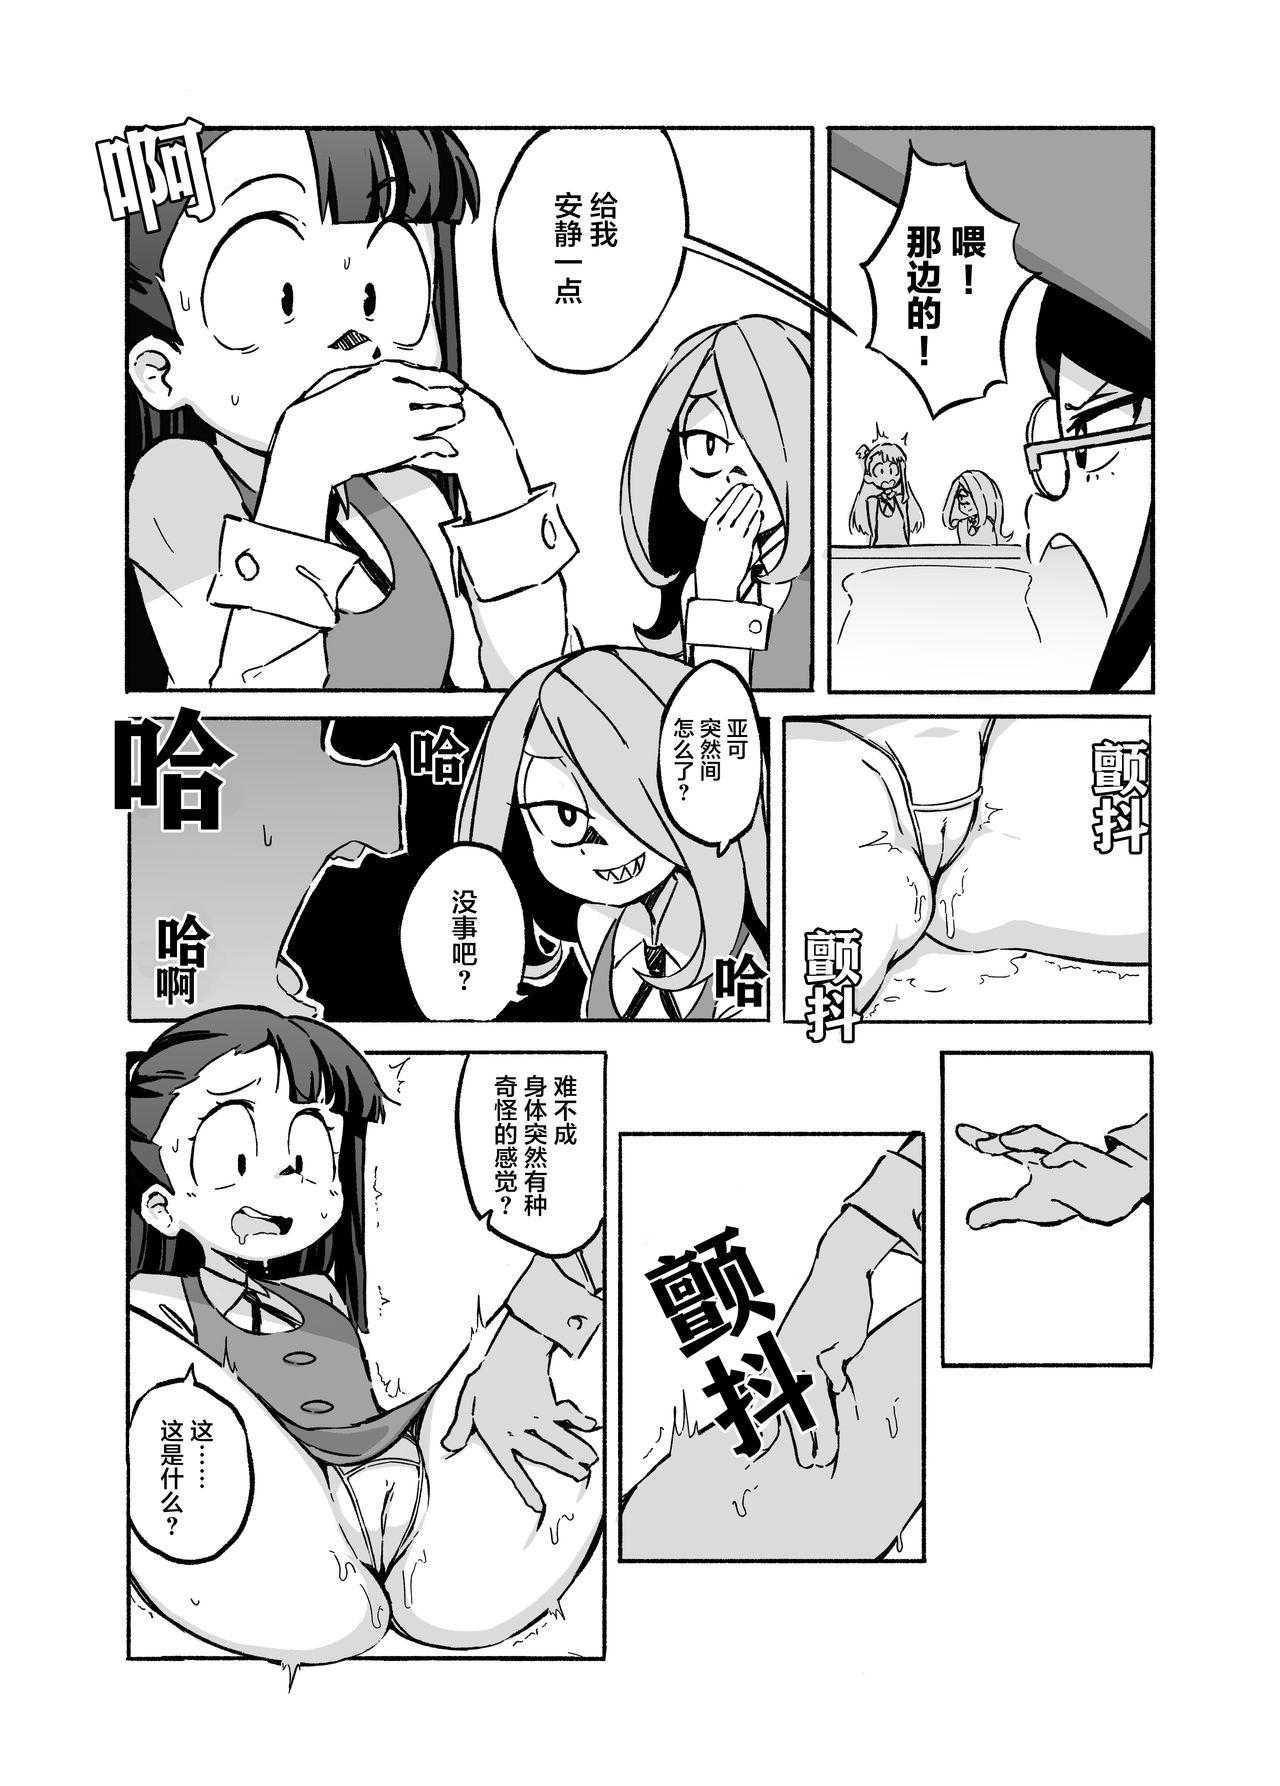 Busty Mushroom Fever - Little witch academia Real Amature Porn - Page 9